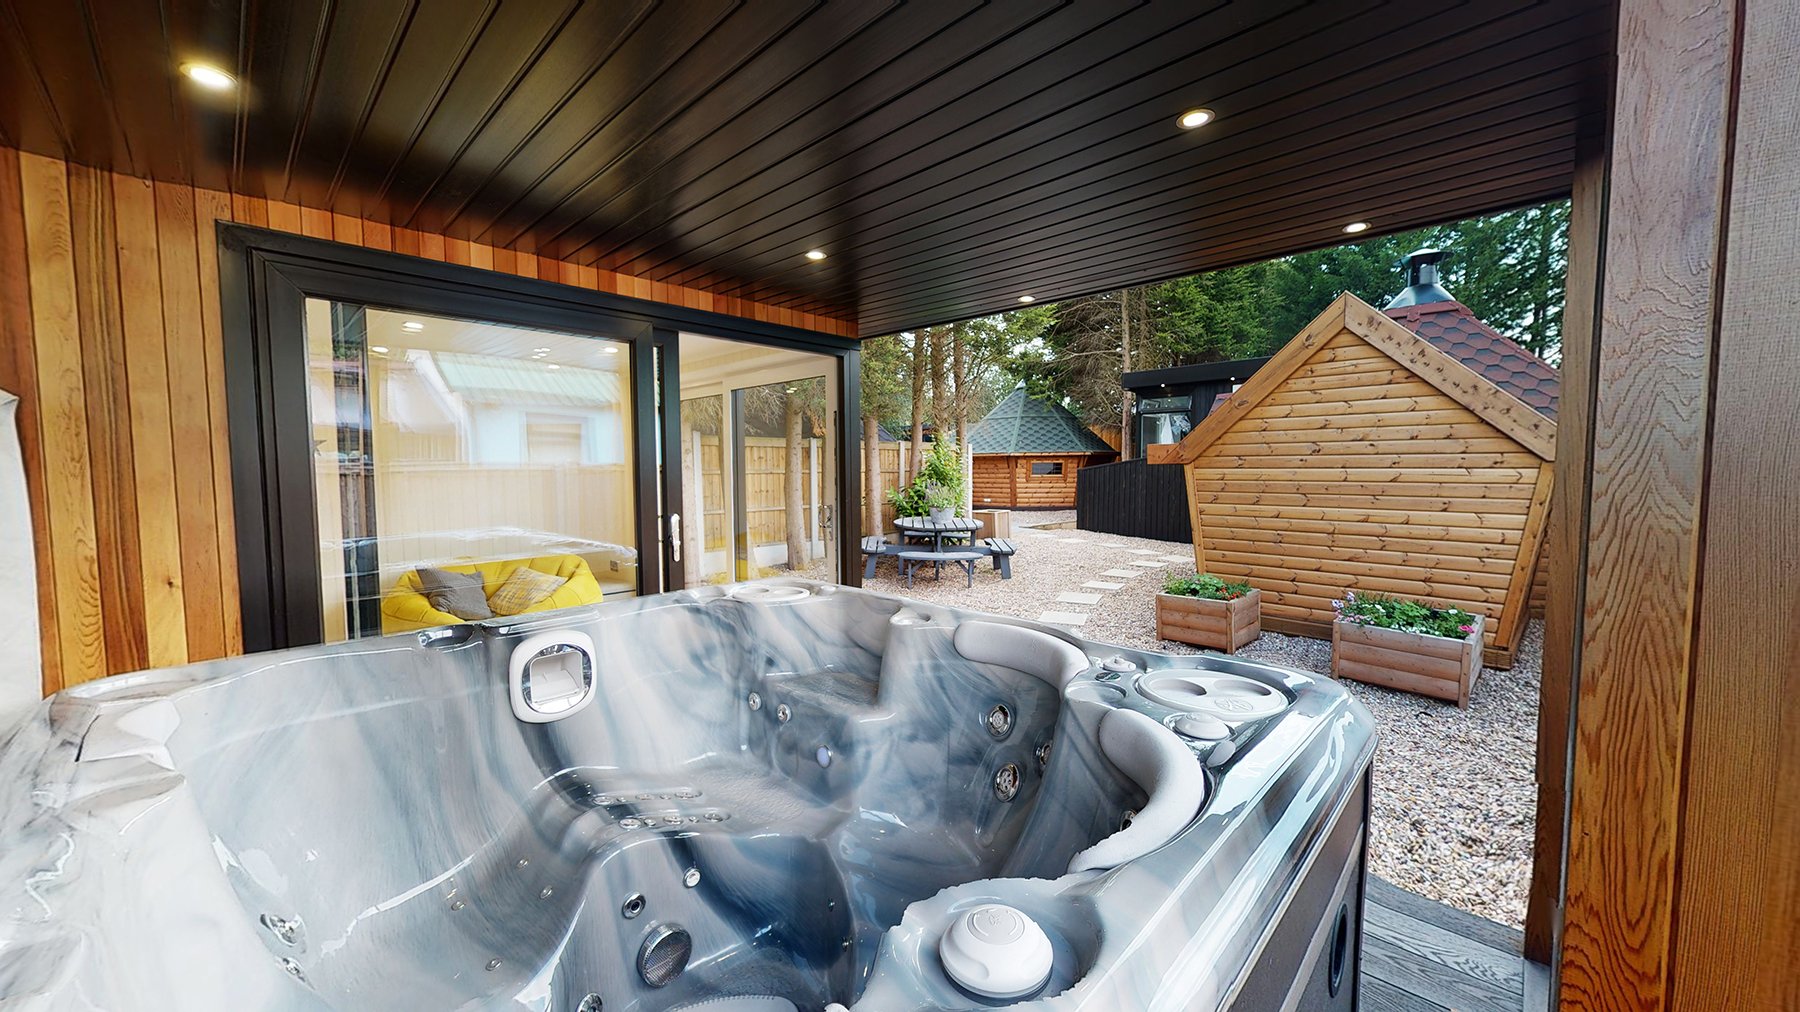 Garden Room With Hot Tub